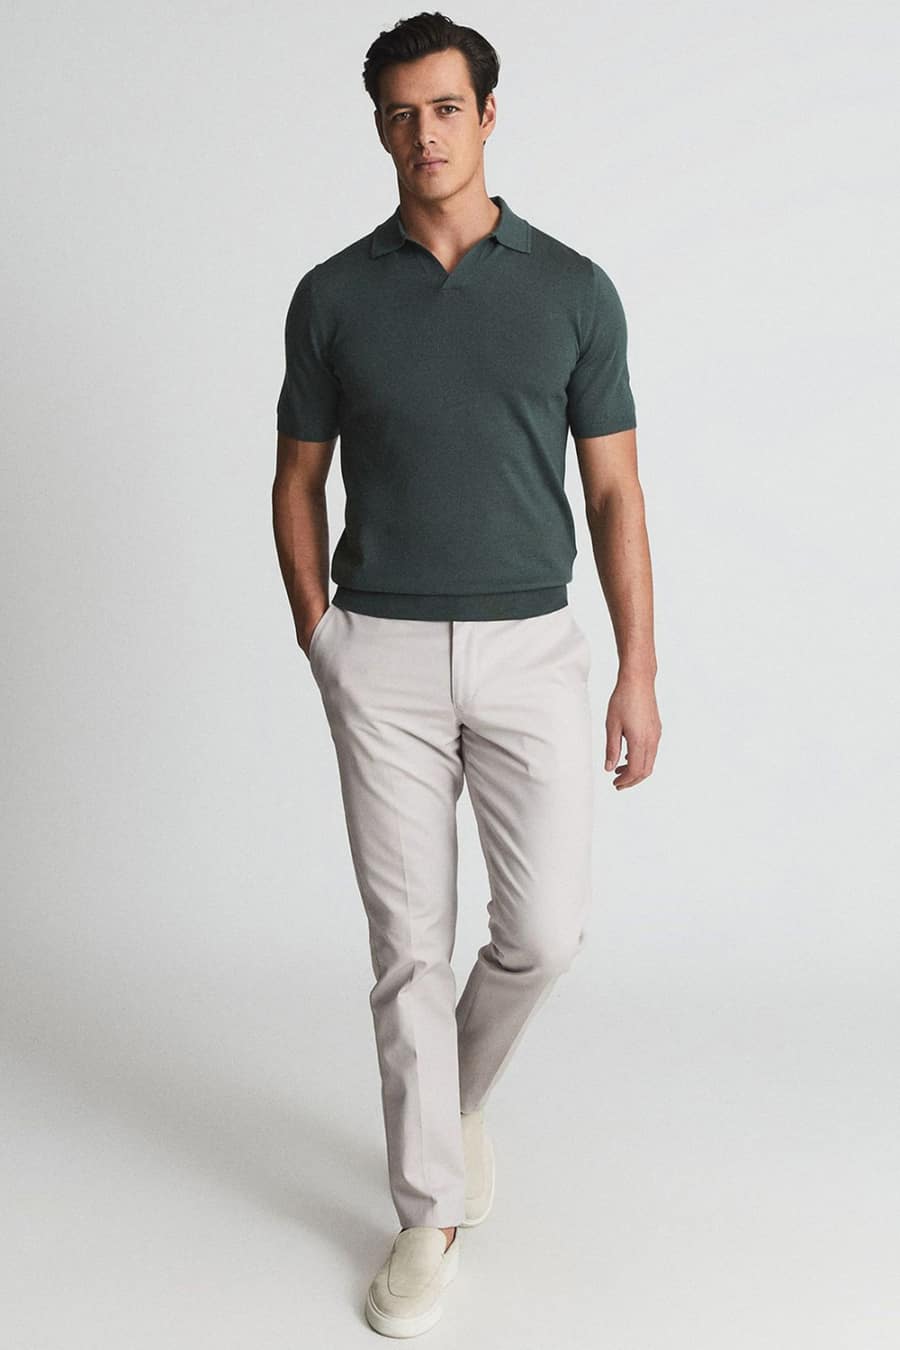 Men's light grey pants, green polo shirt and slip-on sneakers outfit